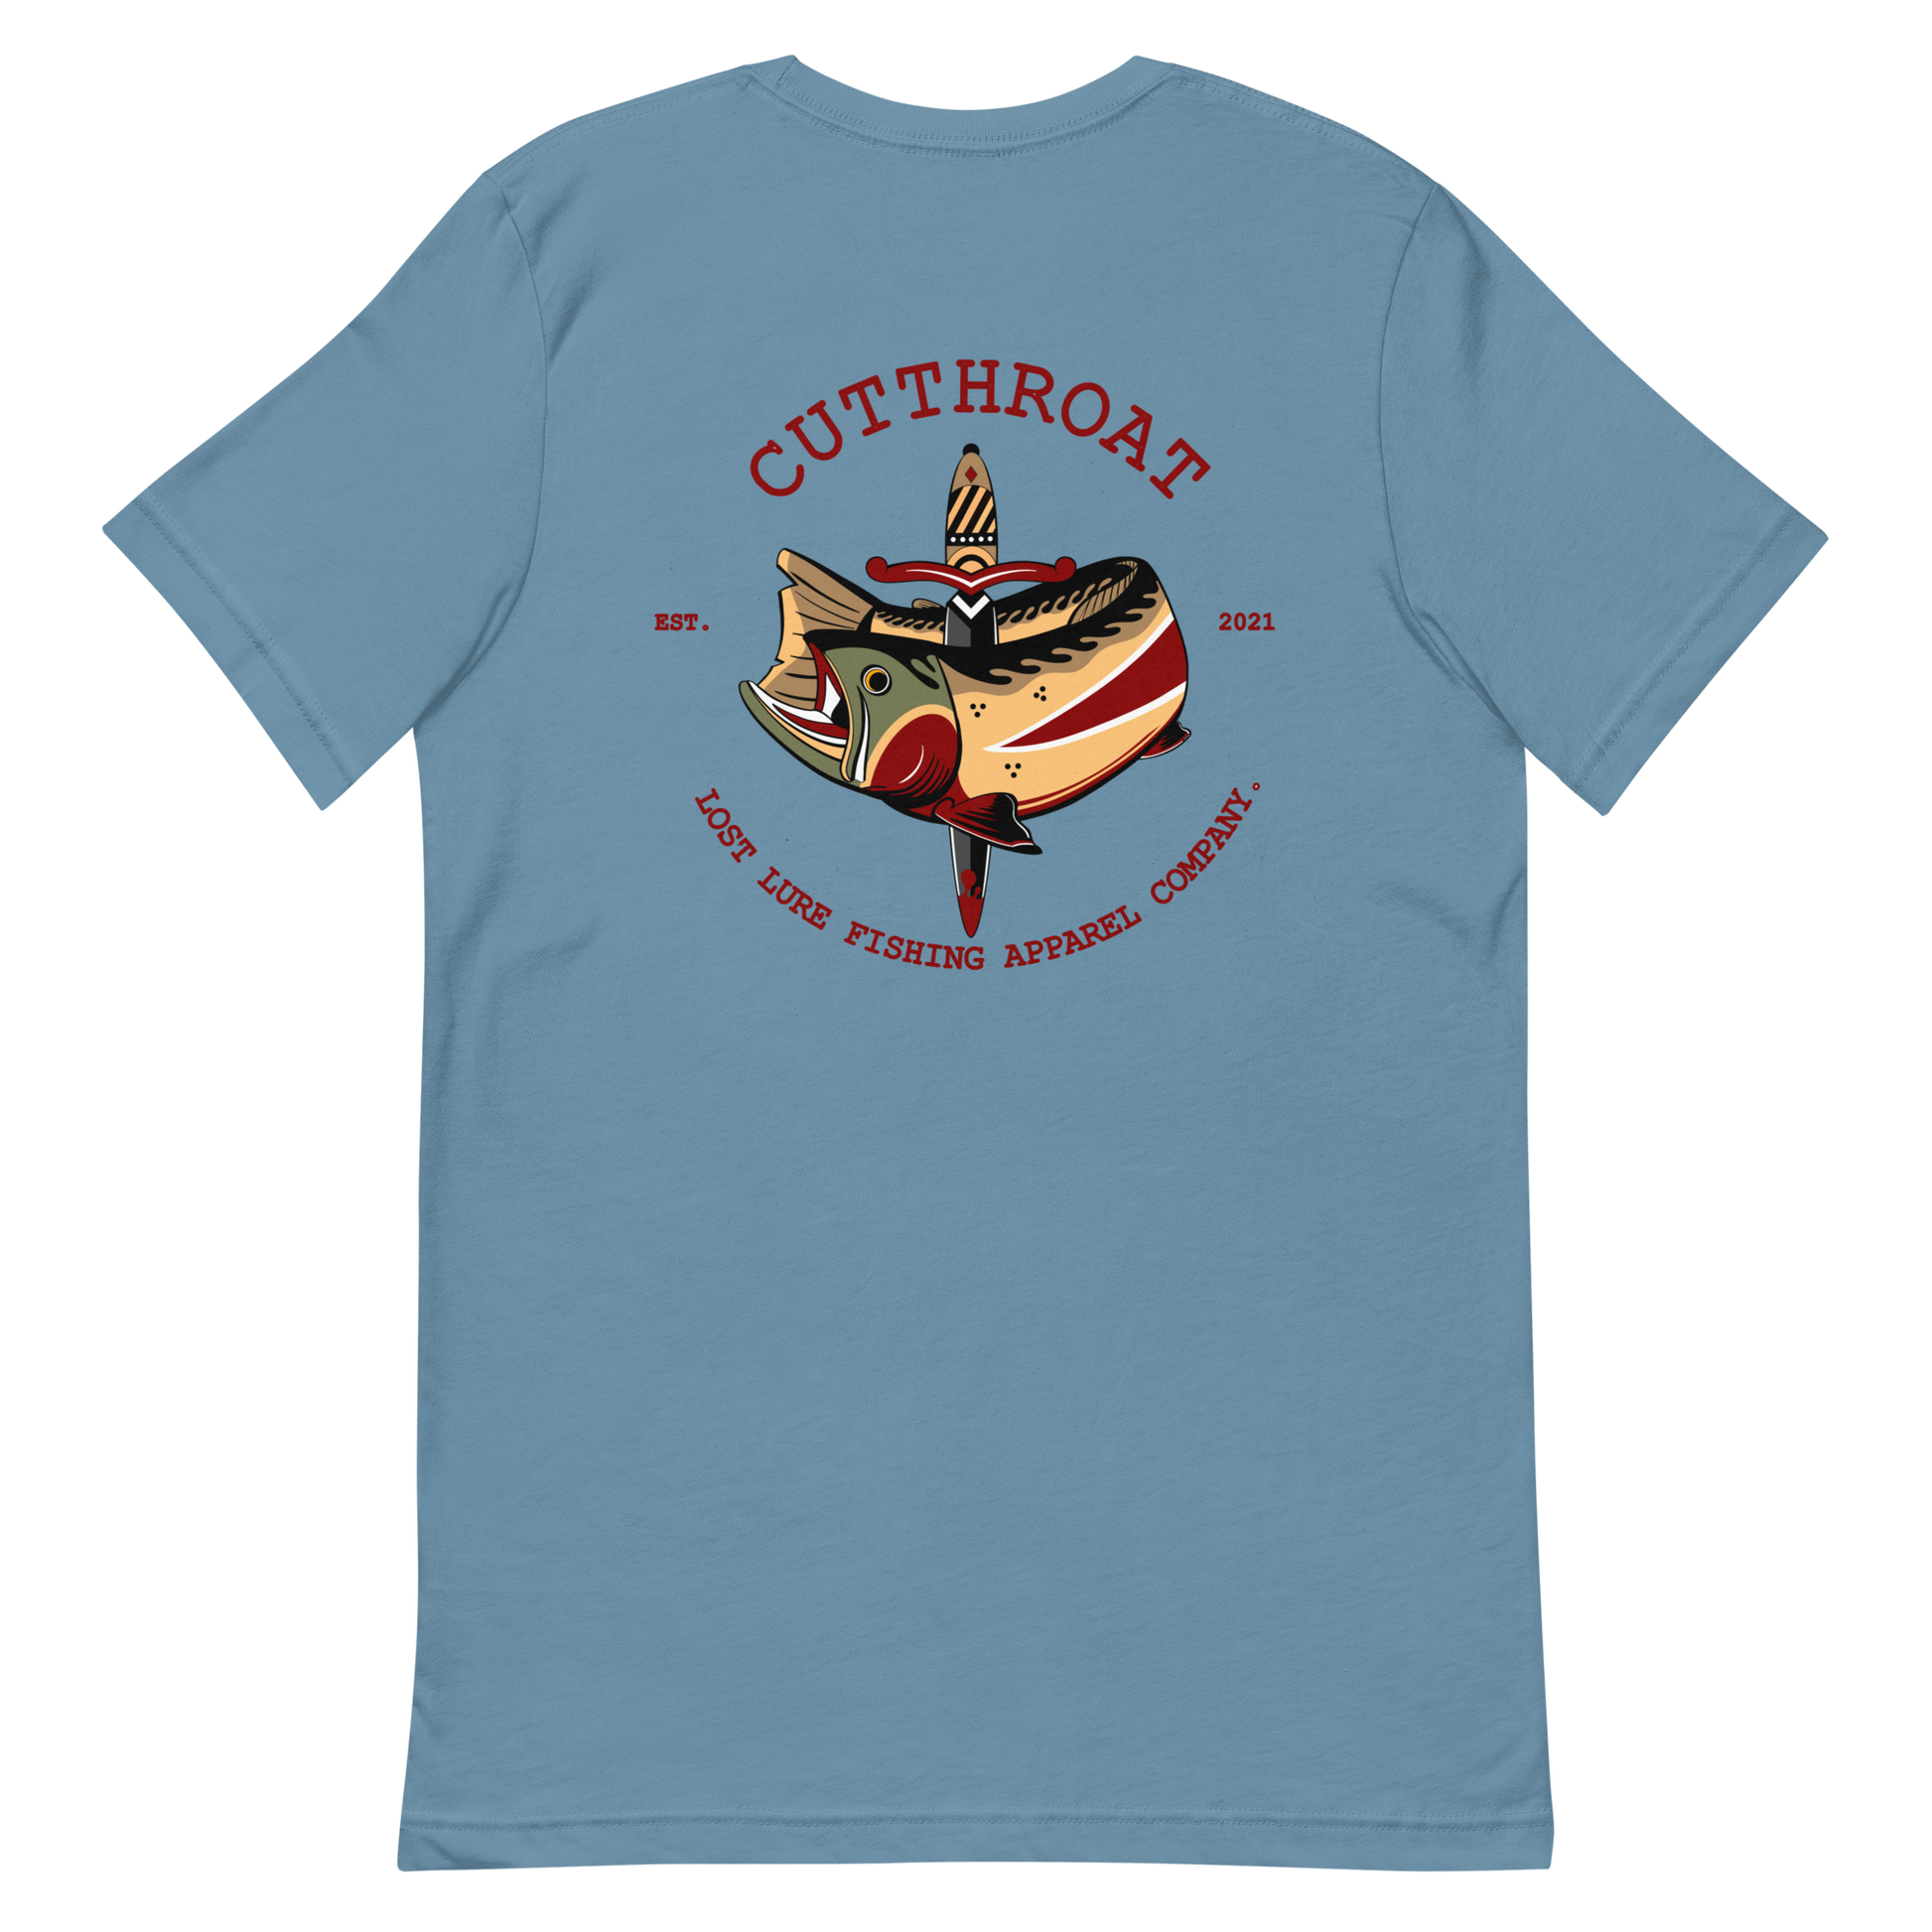 Cutthroat Trout fishing shirt. It’s an American traditional style design with a cutthroat trout and a dagger. The shirt reads Cutthroat trout, est. 2021, lost lure fishing apparel company. The front of the shirt has the lost lure logo. Blue fishing shirt, back side